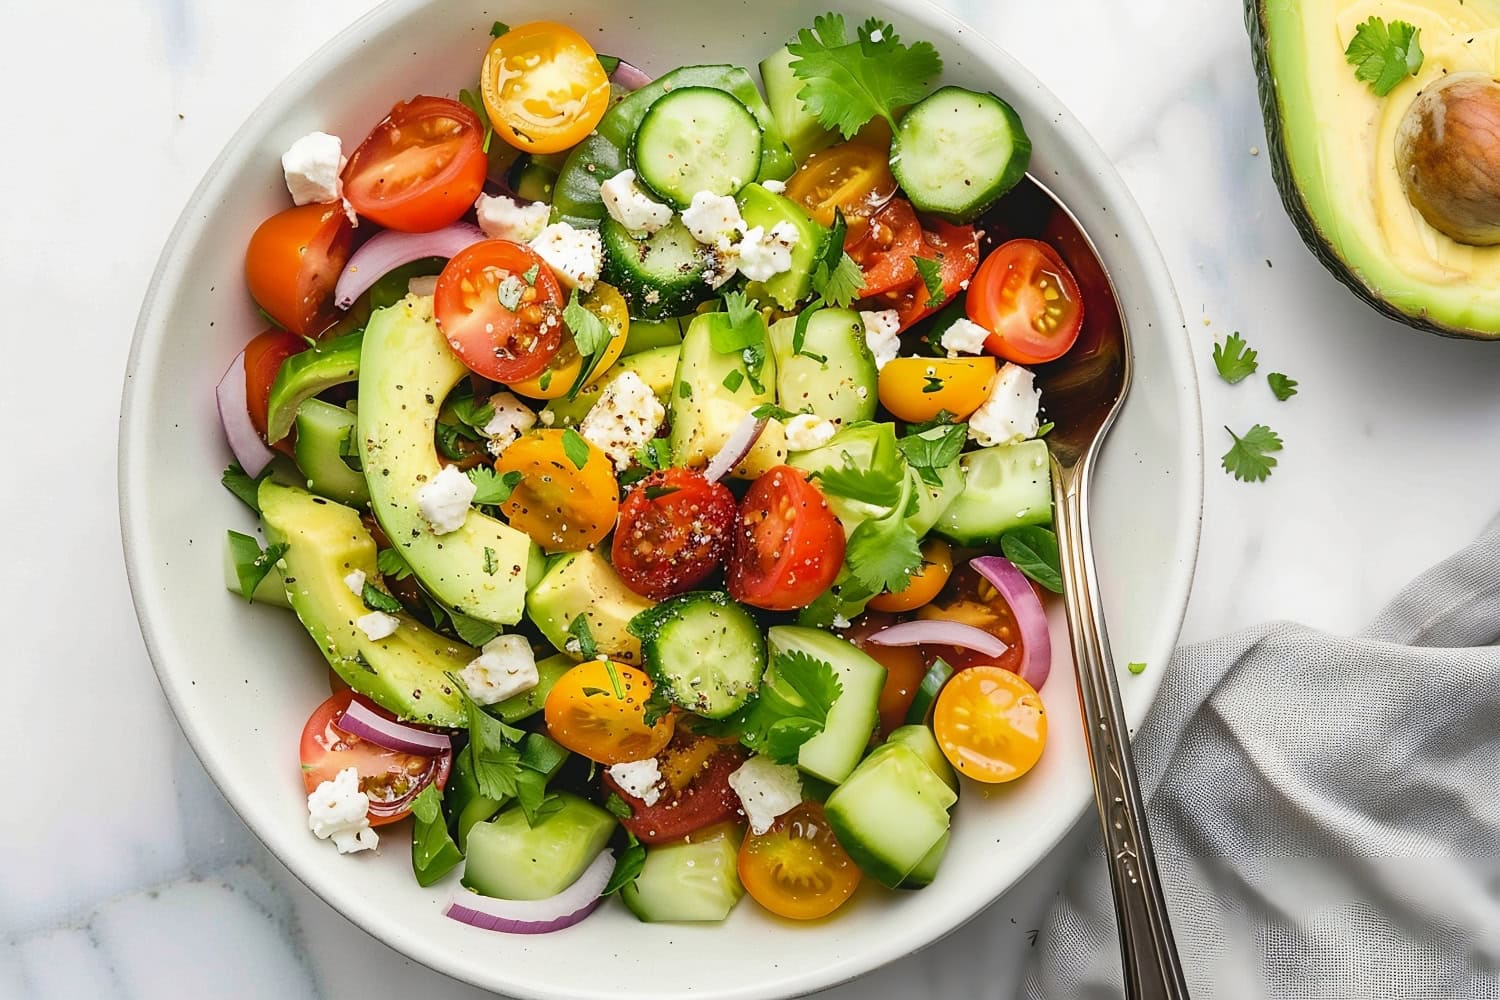 Simple avocado salad in a bowl with cherry tomatoes, feta, cucumbers and red onions.